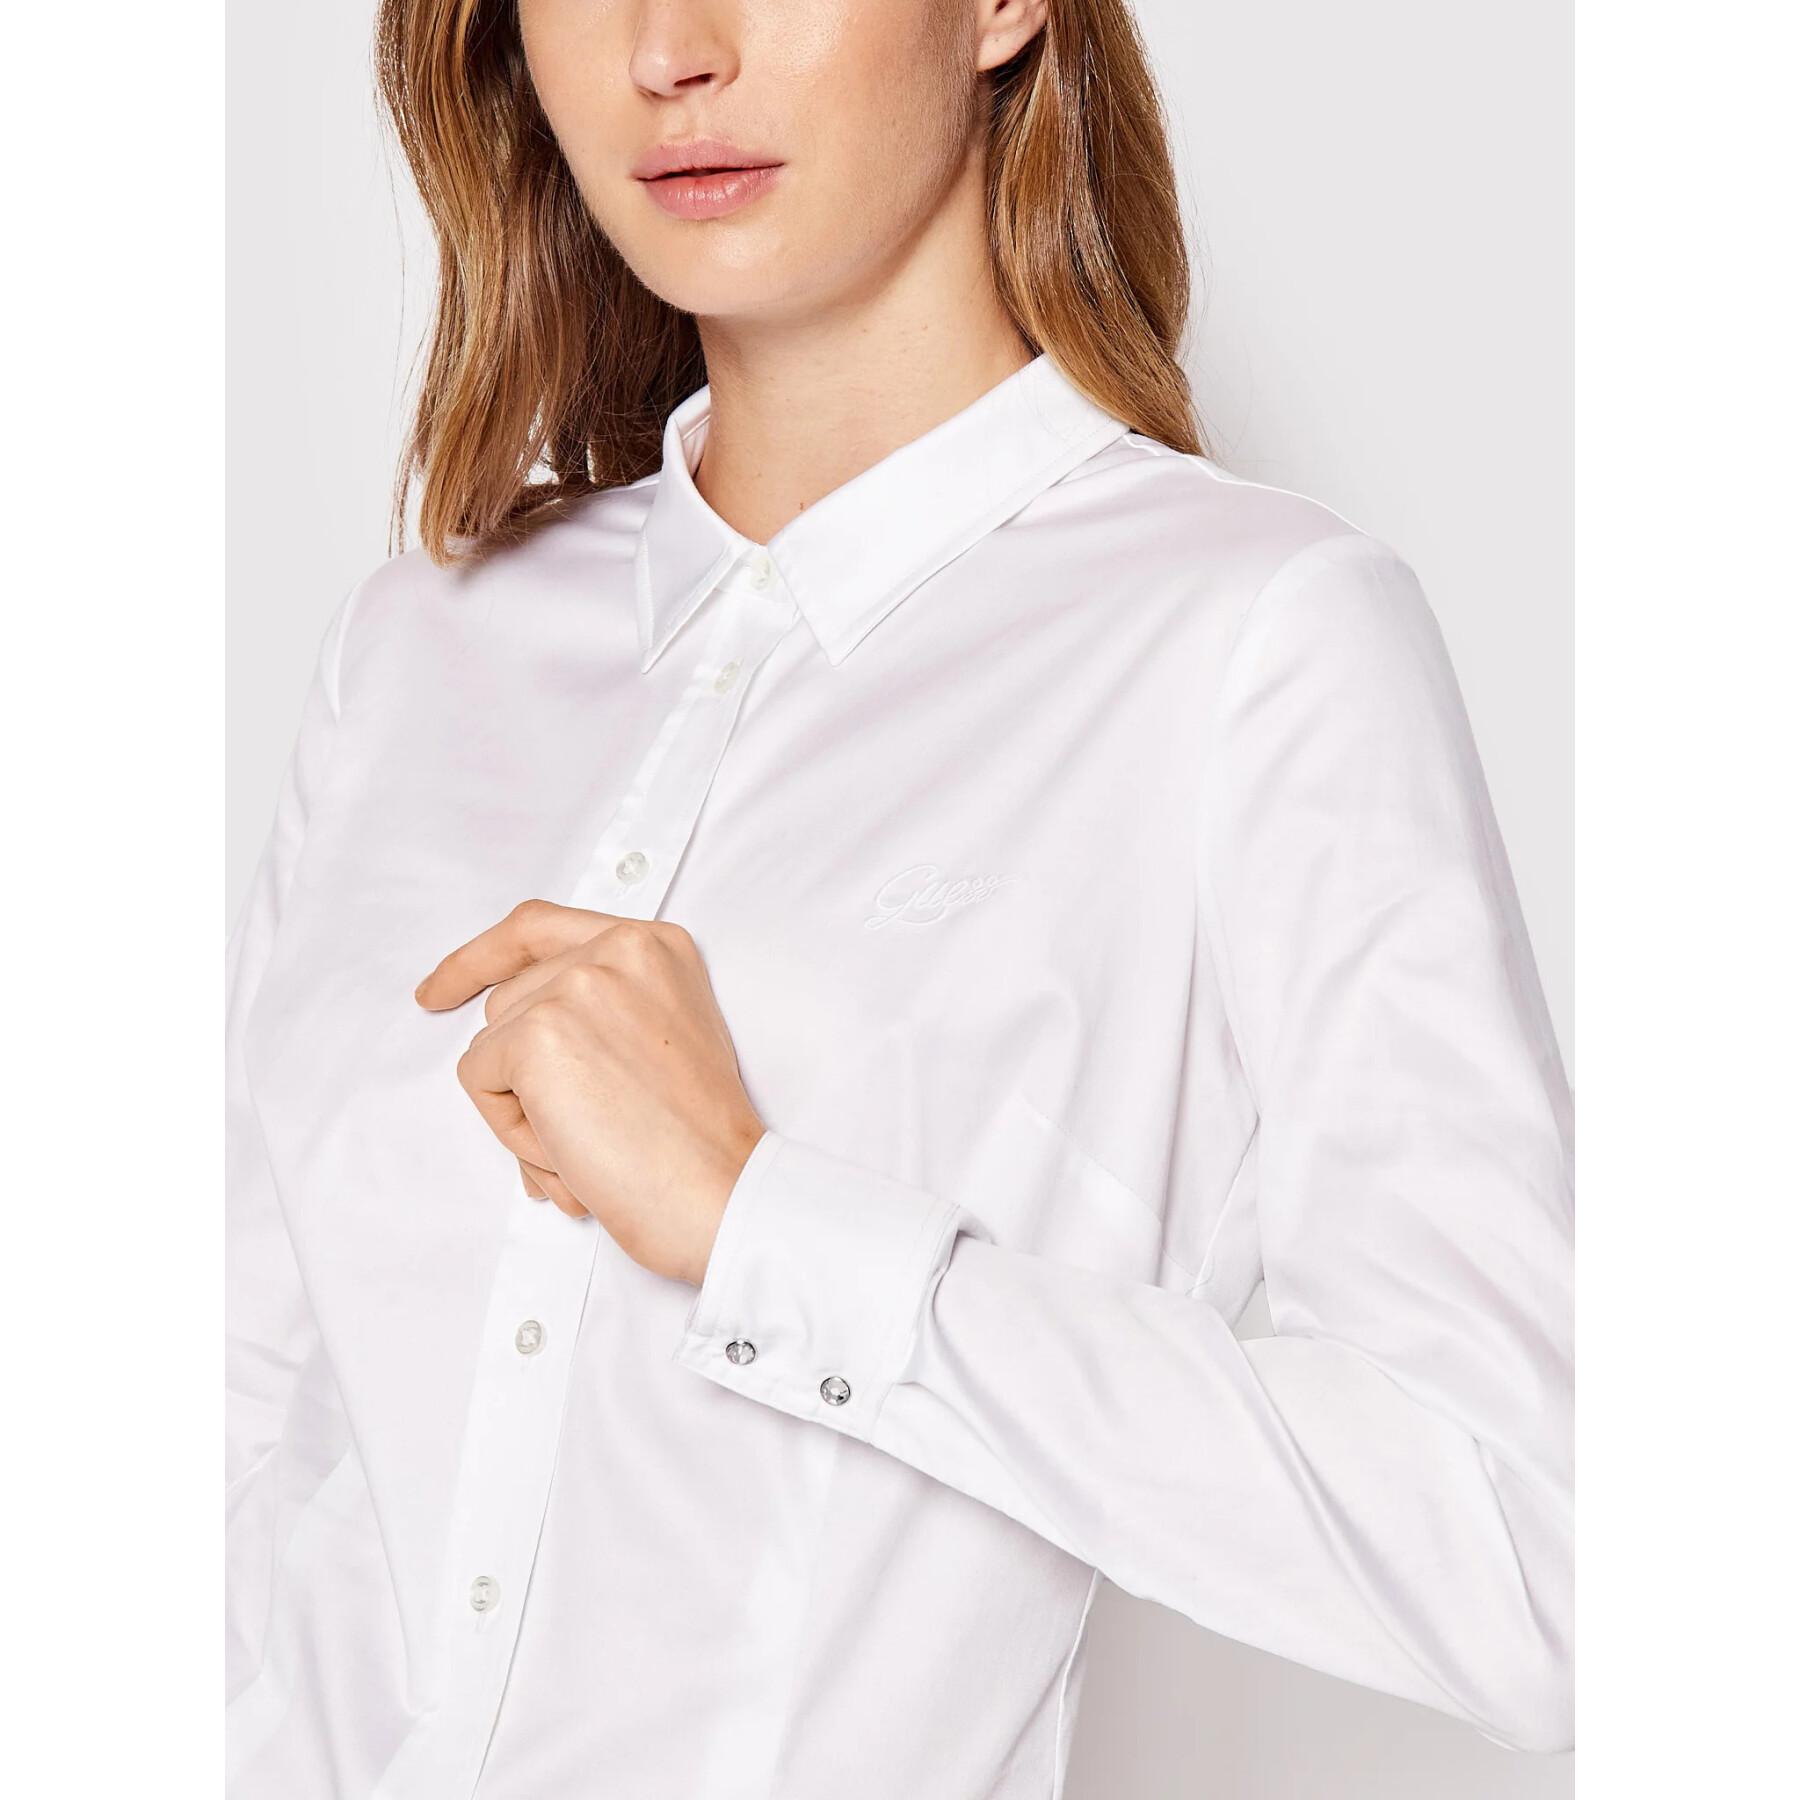 Chemise femme Guess